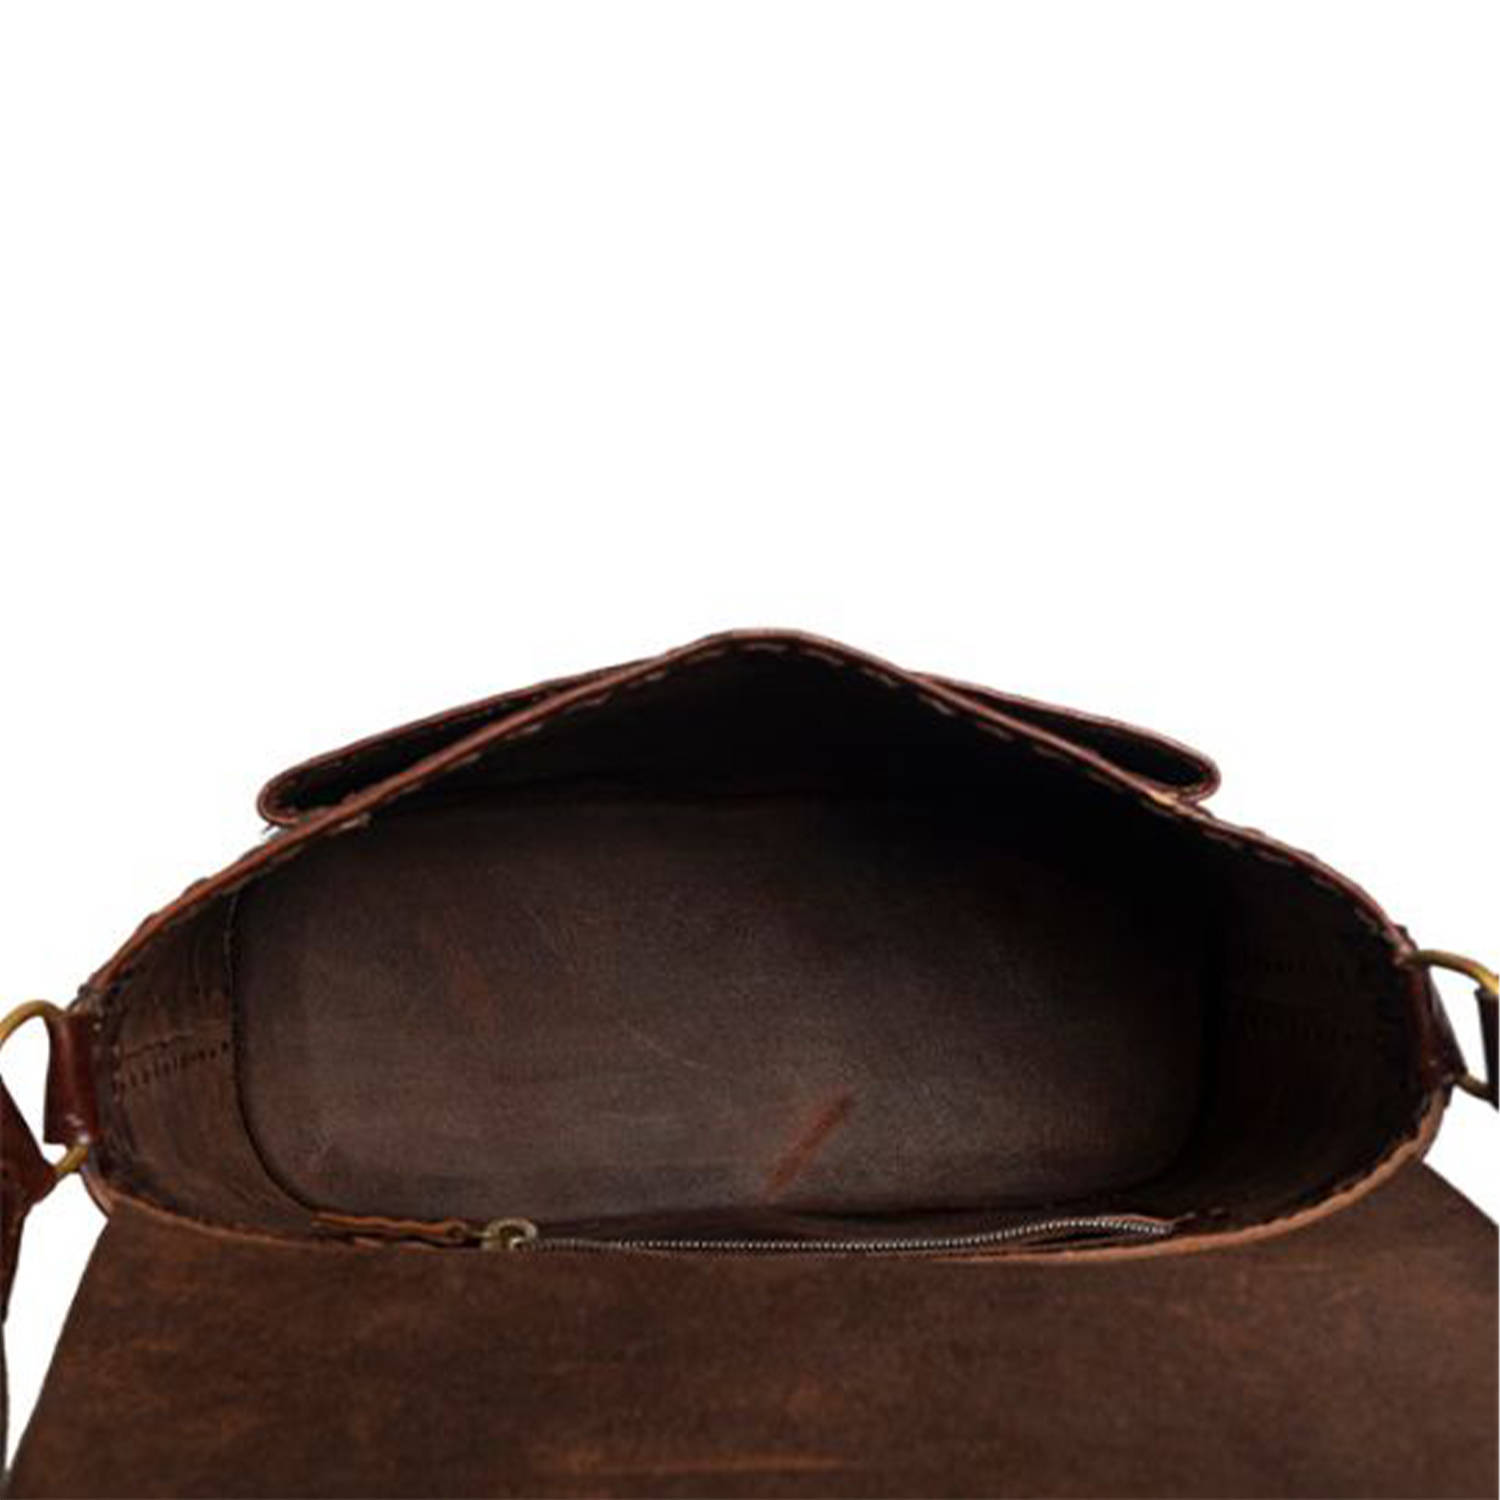 Leather Saddlebags: Buy Premium Leather Vintage Bags For Men & Women – TLB  - The Leather Boutique